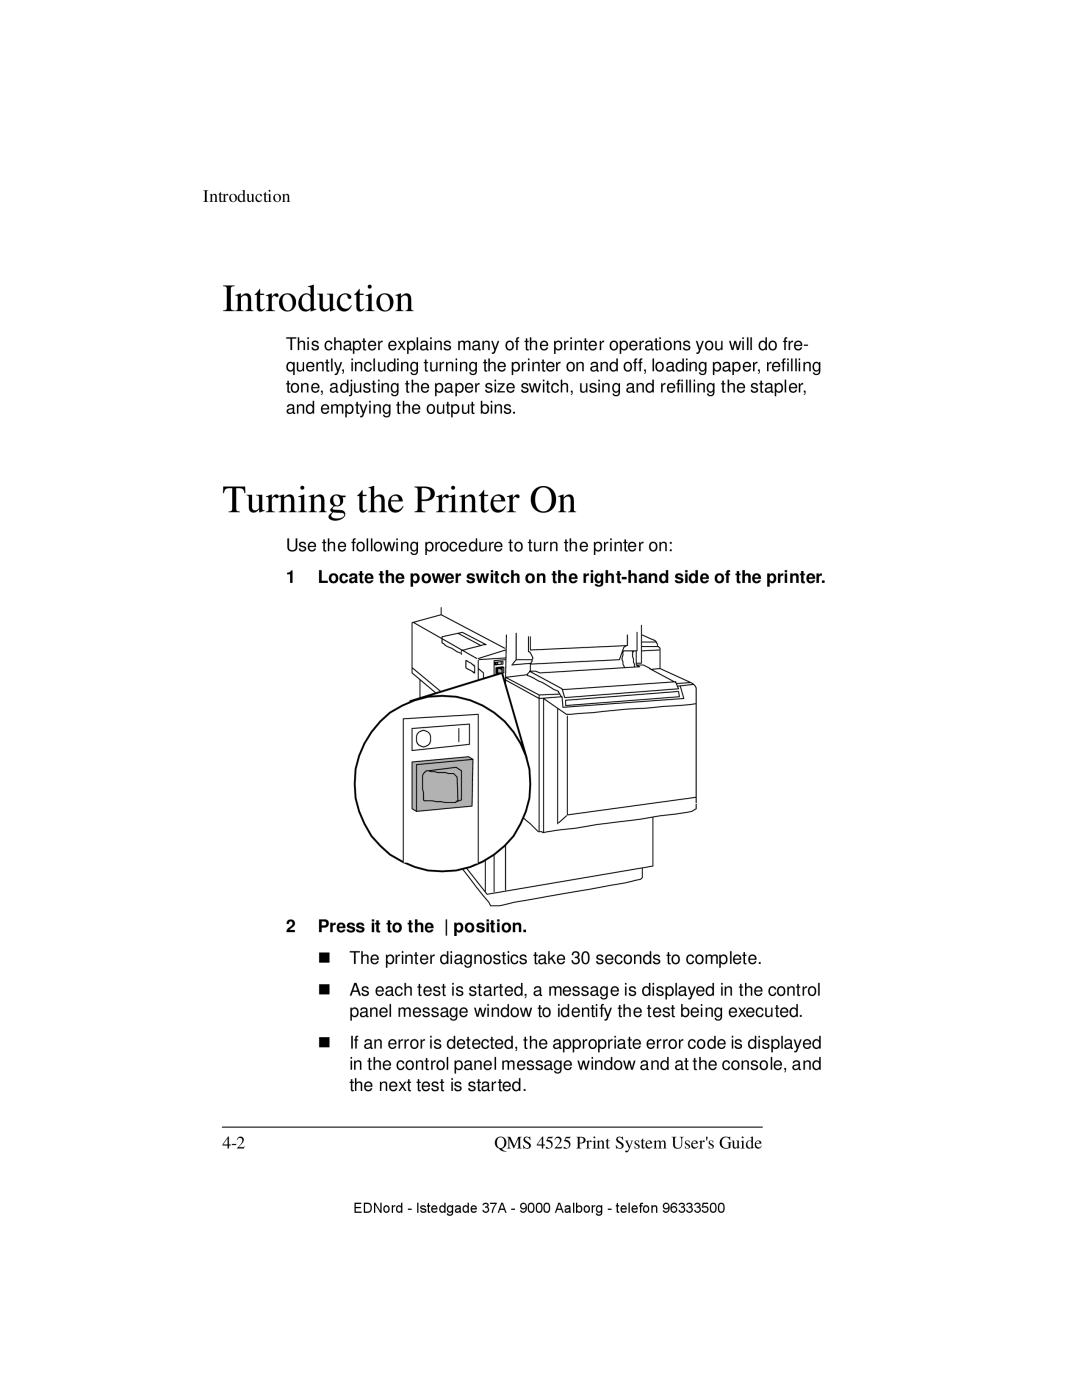 IBM QMS 4525 manual Turning the Printer On, Introduction, Locate the power switch on the right-hand side of the printer 